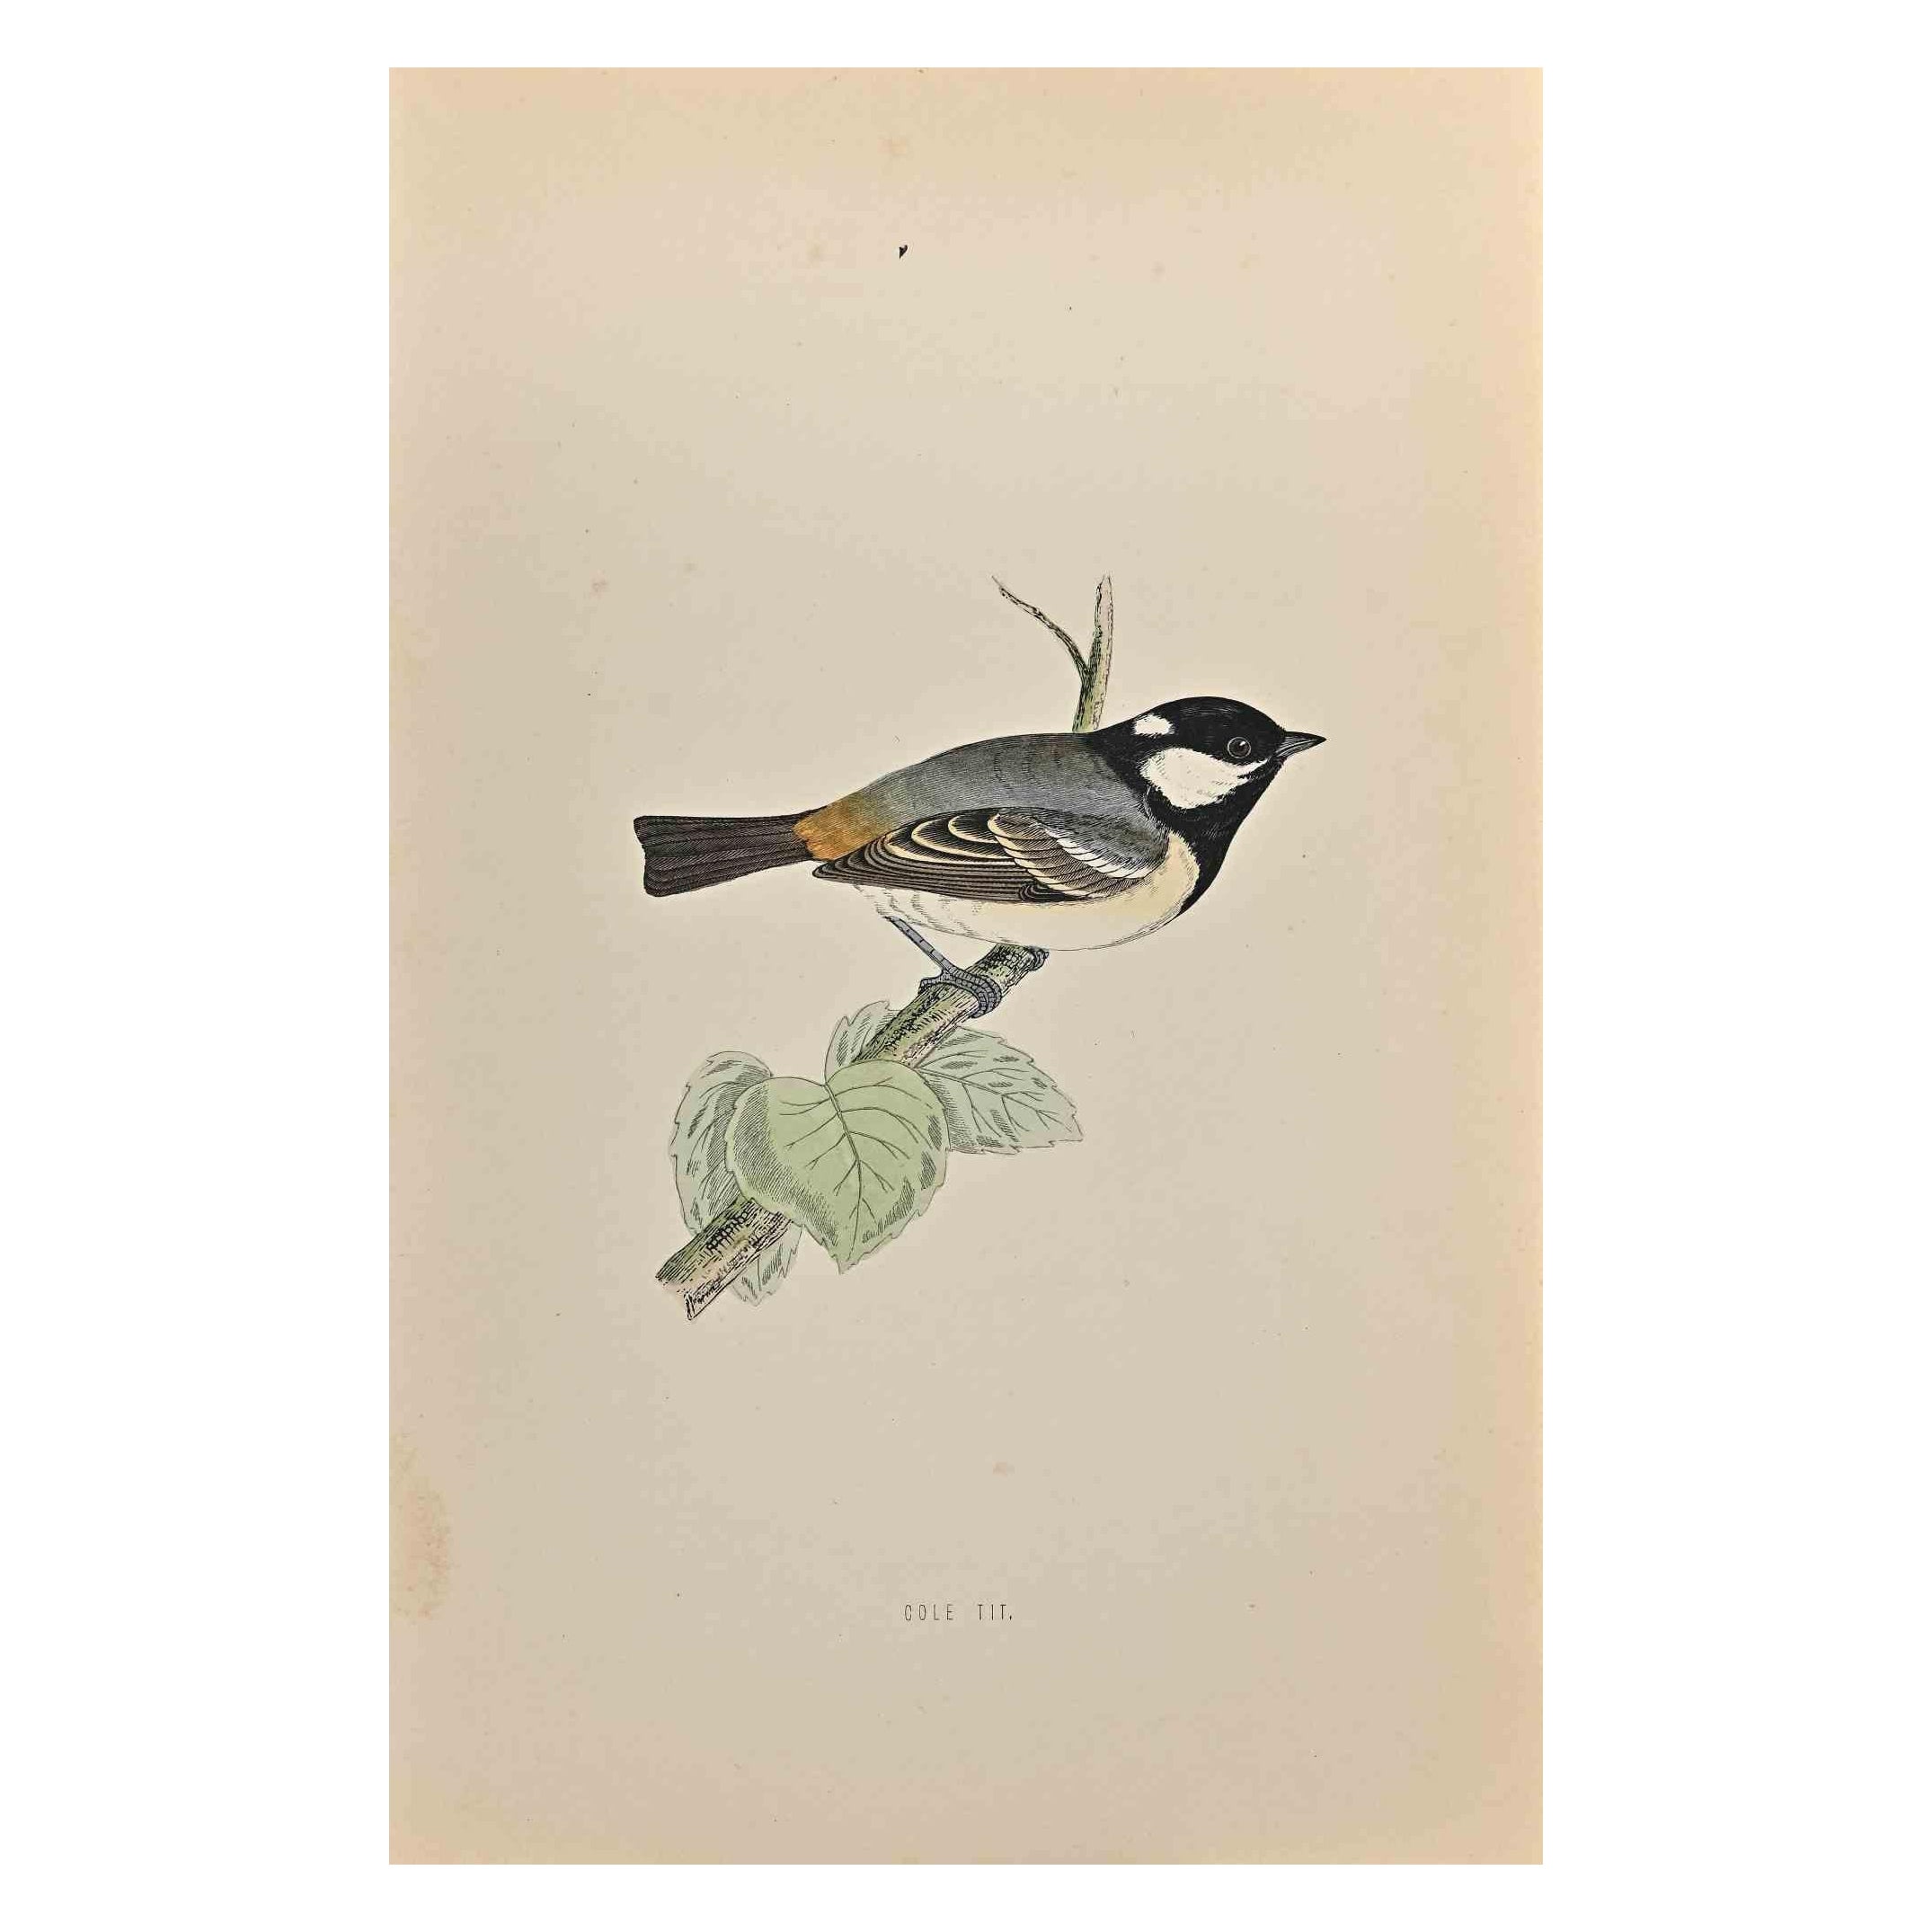 Cole Tit is a modern artwork realized in 1870 by the British artist Alexander Francis Lydon (1836-1917).

Woodcut print on ivory-colored paper.

Hand-colored, published by London, Bell & Sons, 1870.  

The name of the bird is printed on the plate.